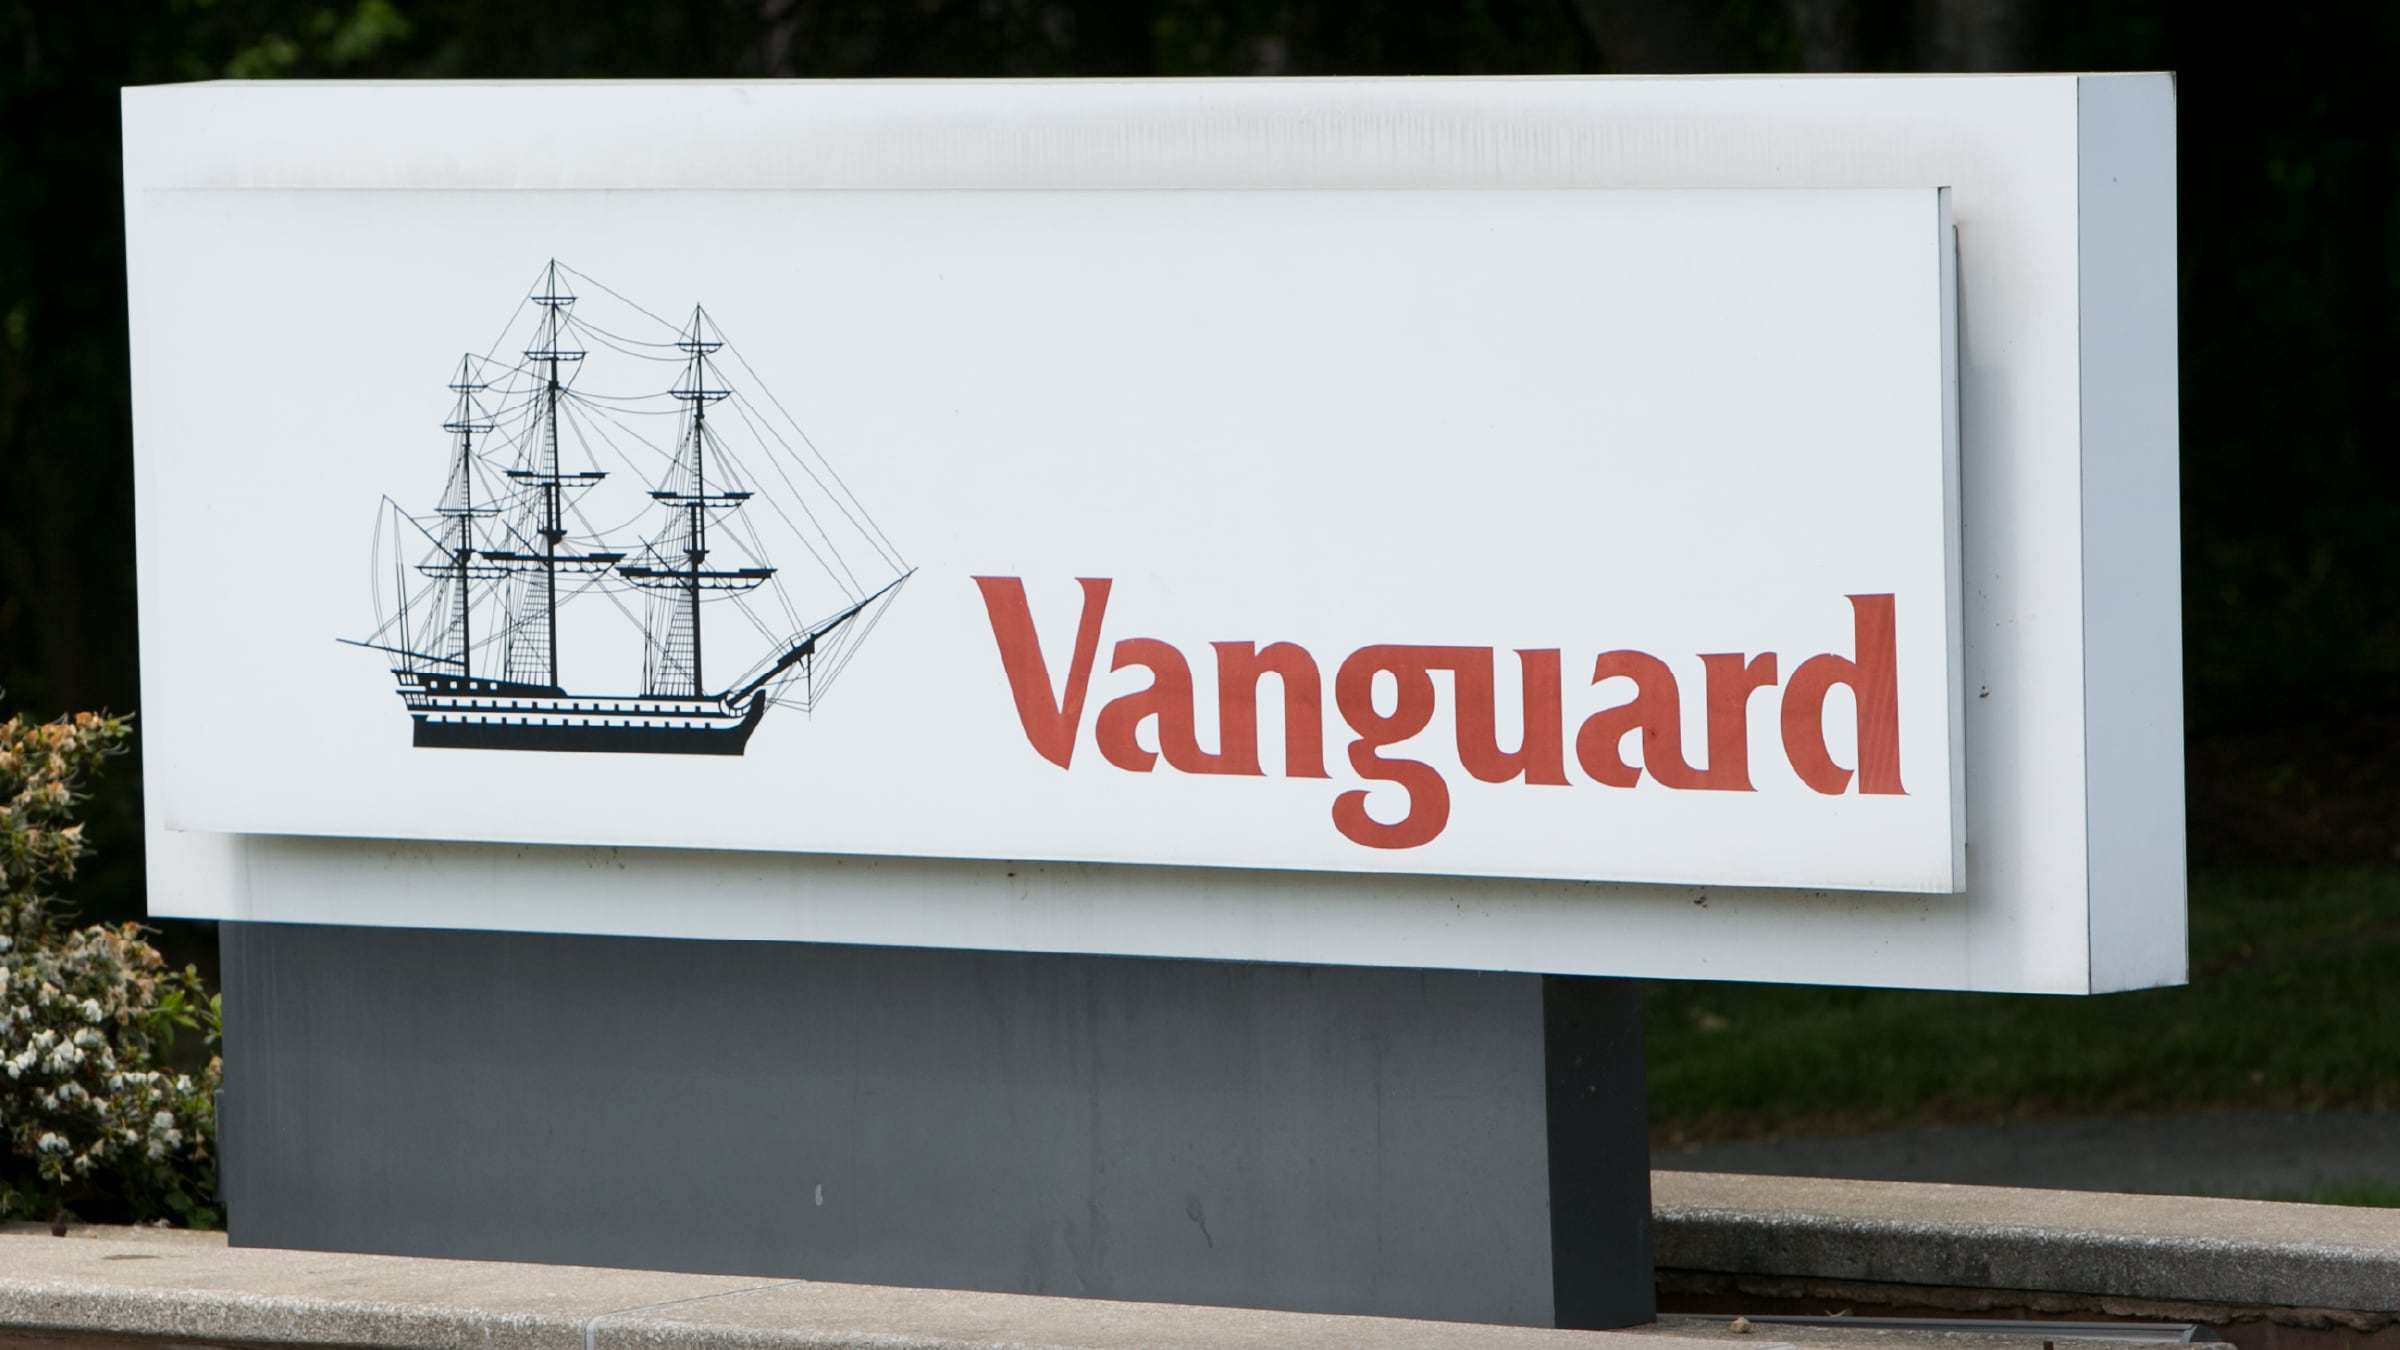 Lessons From Vanguard TargetDate’s Capital Gains Surprise Morningstar